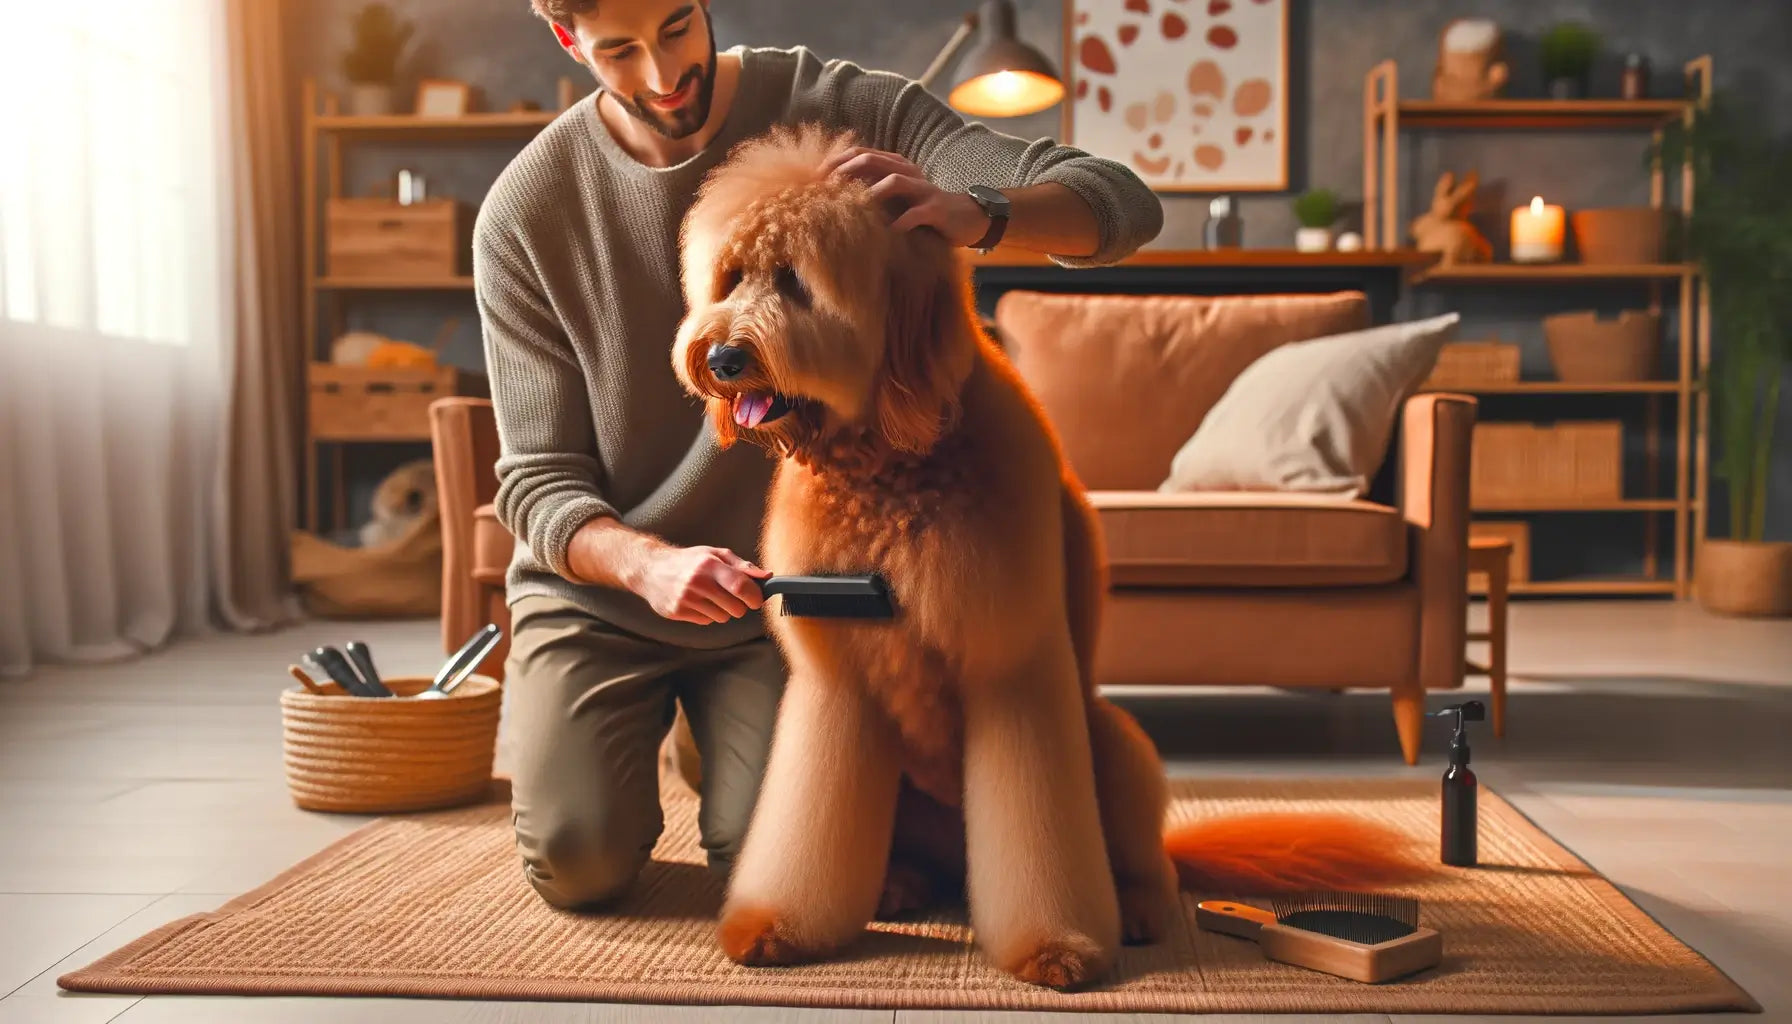 Red Goldendoodle enjoying a grooming session at home with its owner.